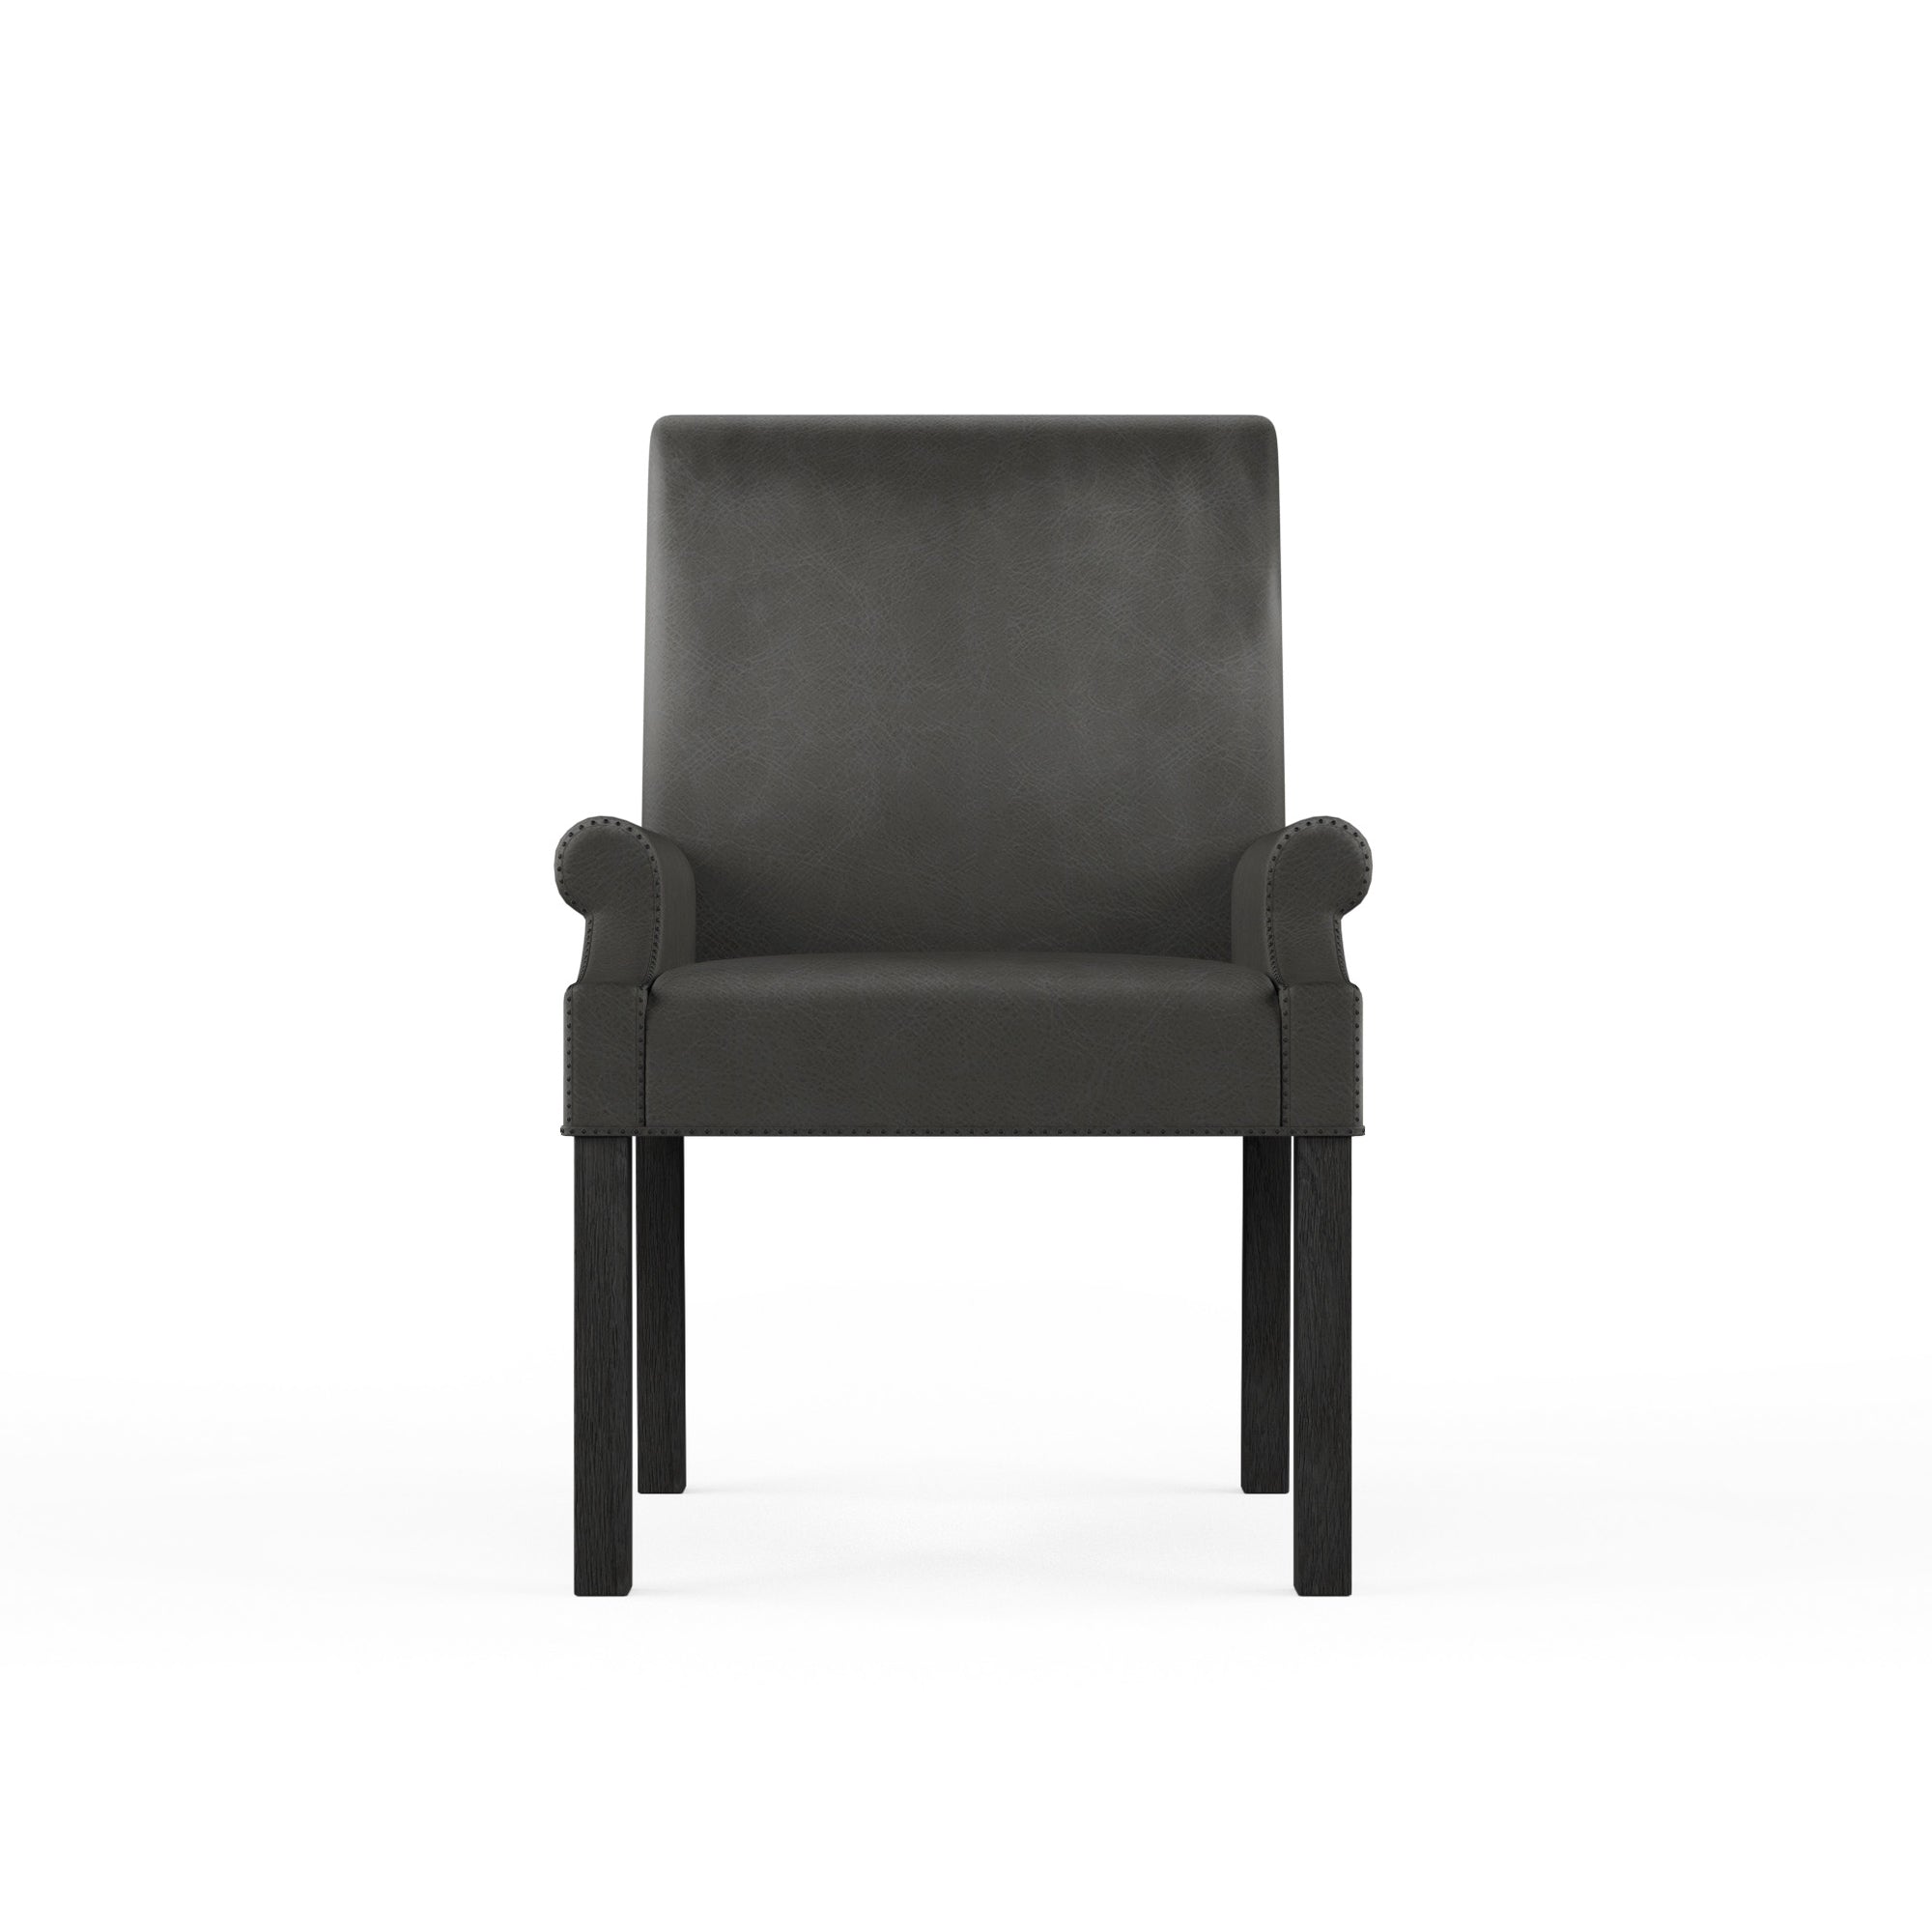 Abigail Dining Chair - Graphite Vintage Leather